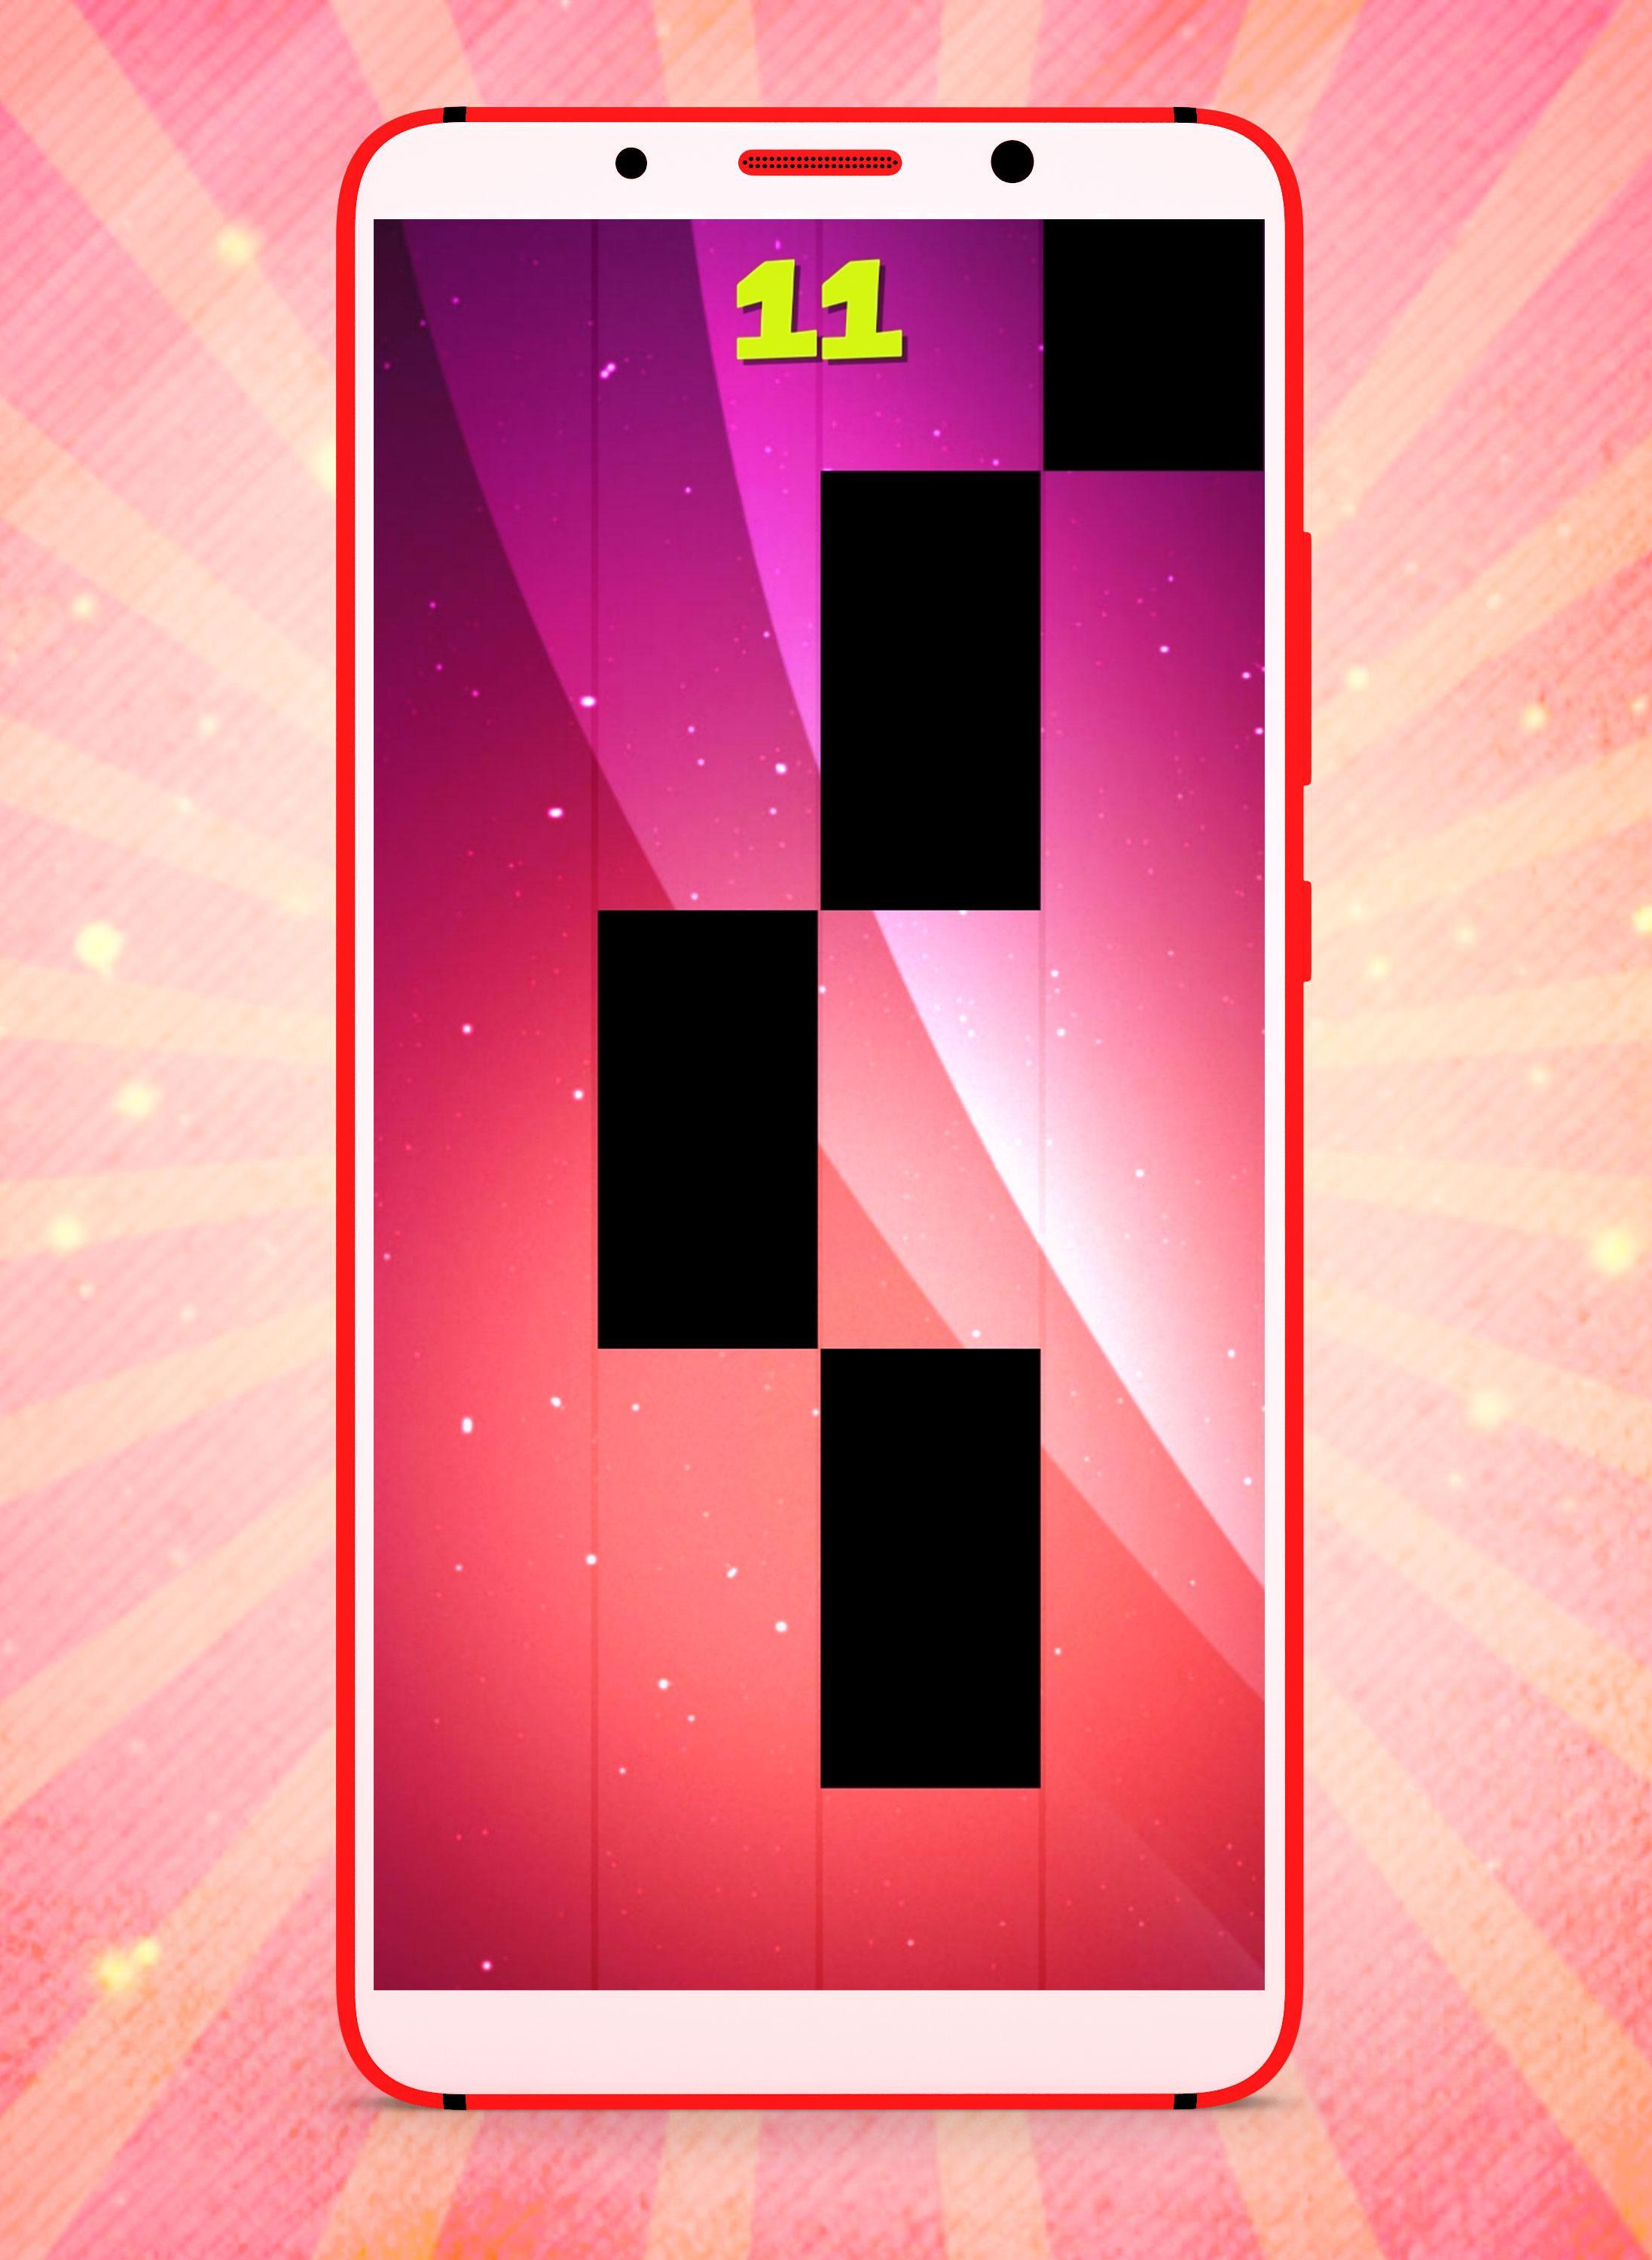 Polo G Lil Tjay Pop Out Fancy Piano Tiles APK for Android Download